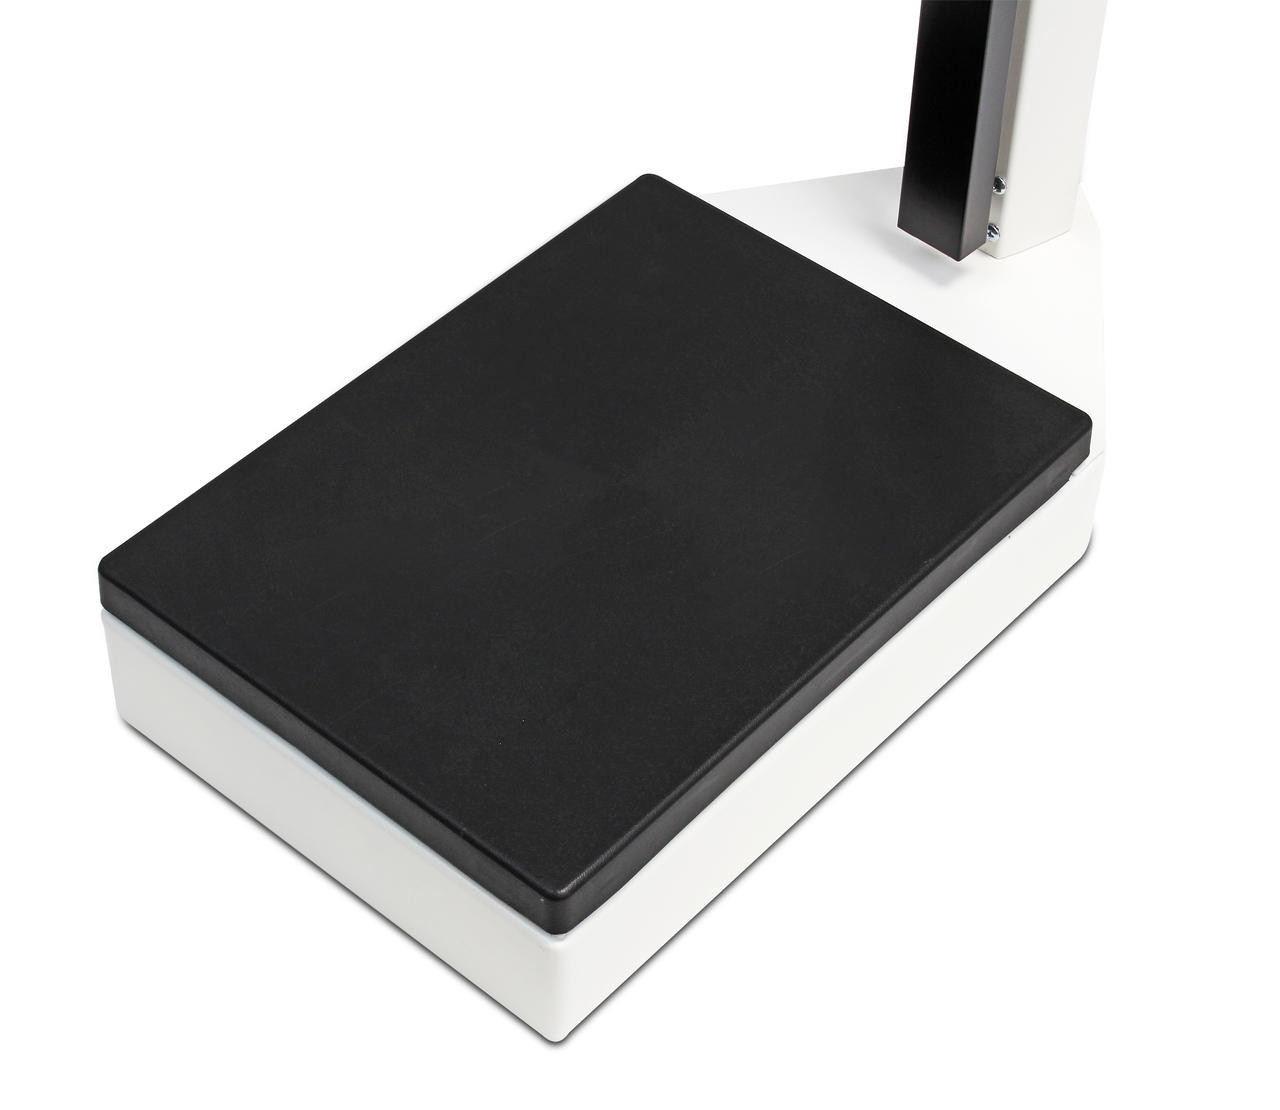 Detecto Physician Mechanical Beam Scale with Height Rod & Hand Post